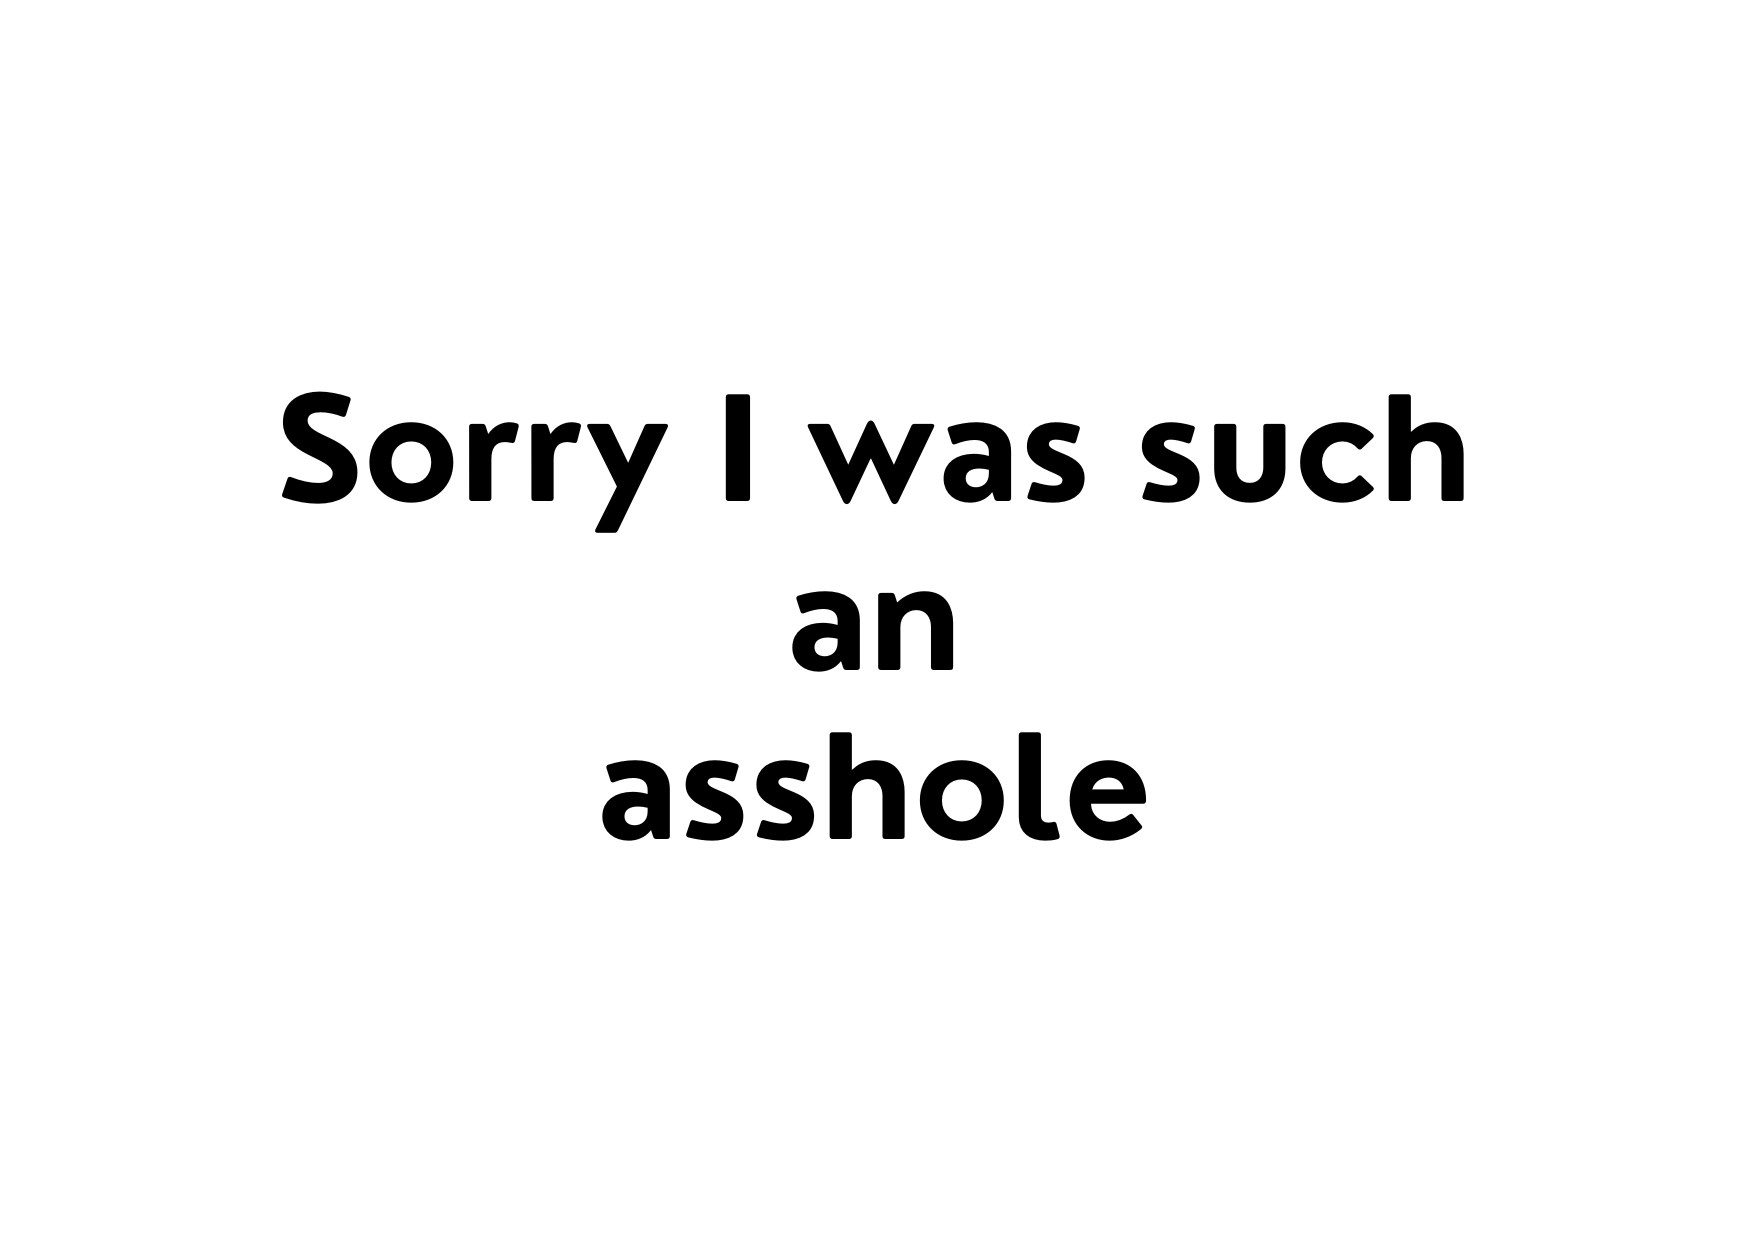 White seed paper greeting card saying "Sorry I was such an asshole"